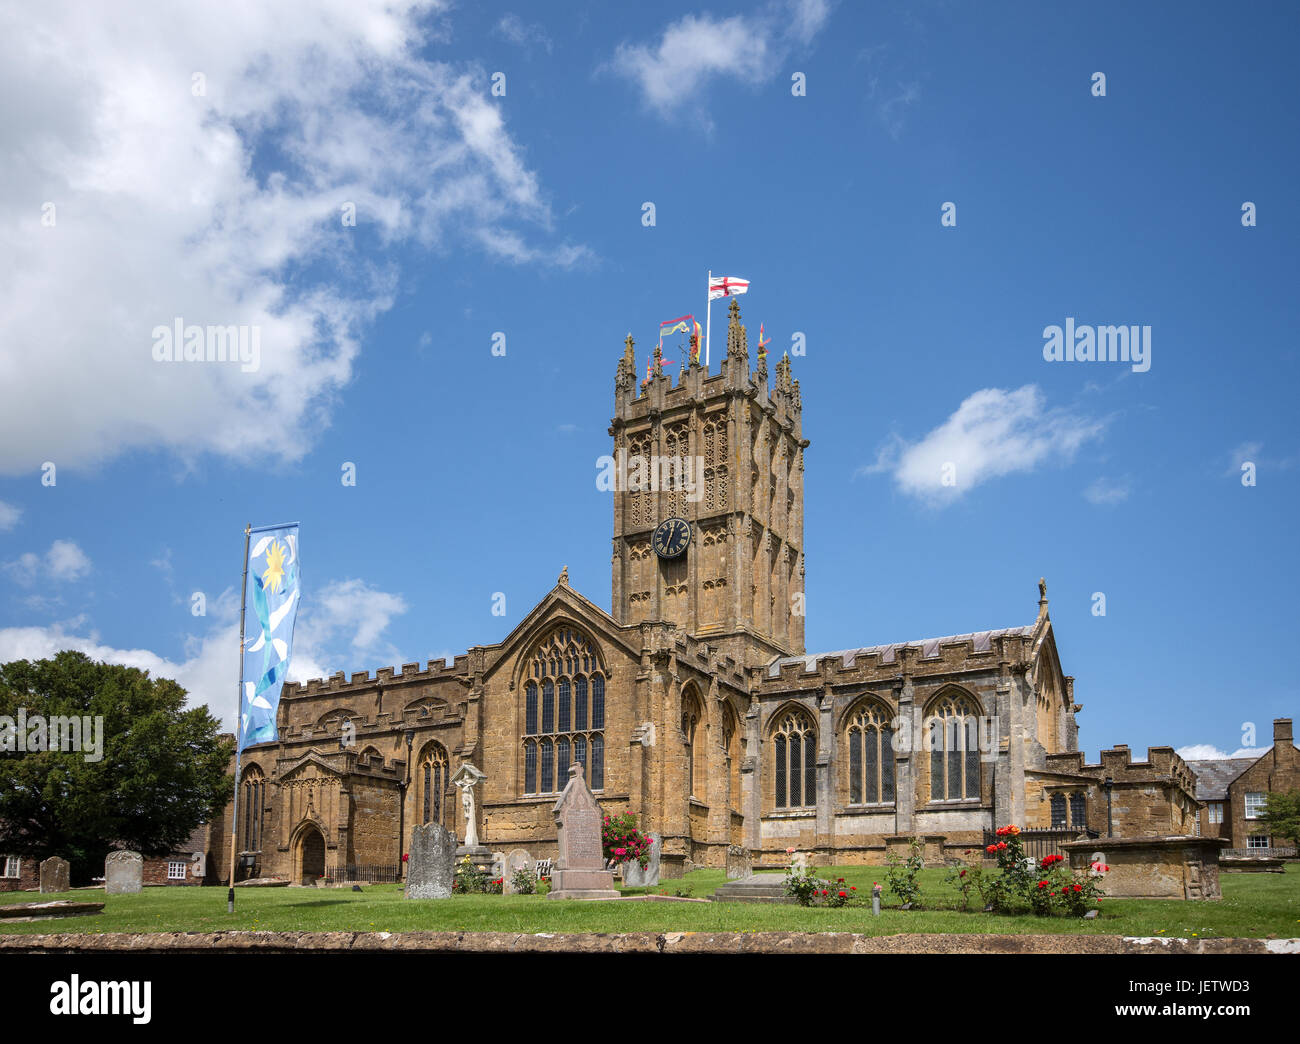 The Minster or 15th century Church of St Mary built of Ham Hill stone on Silver Street Ilminster Somerset seen in summer sunshine Stock Photo